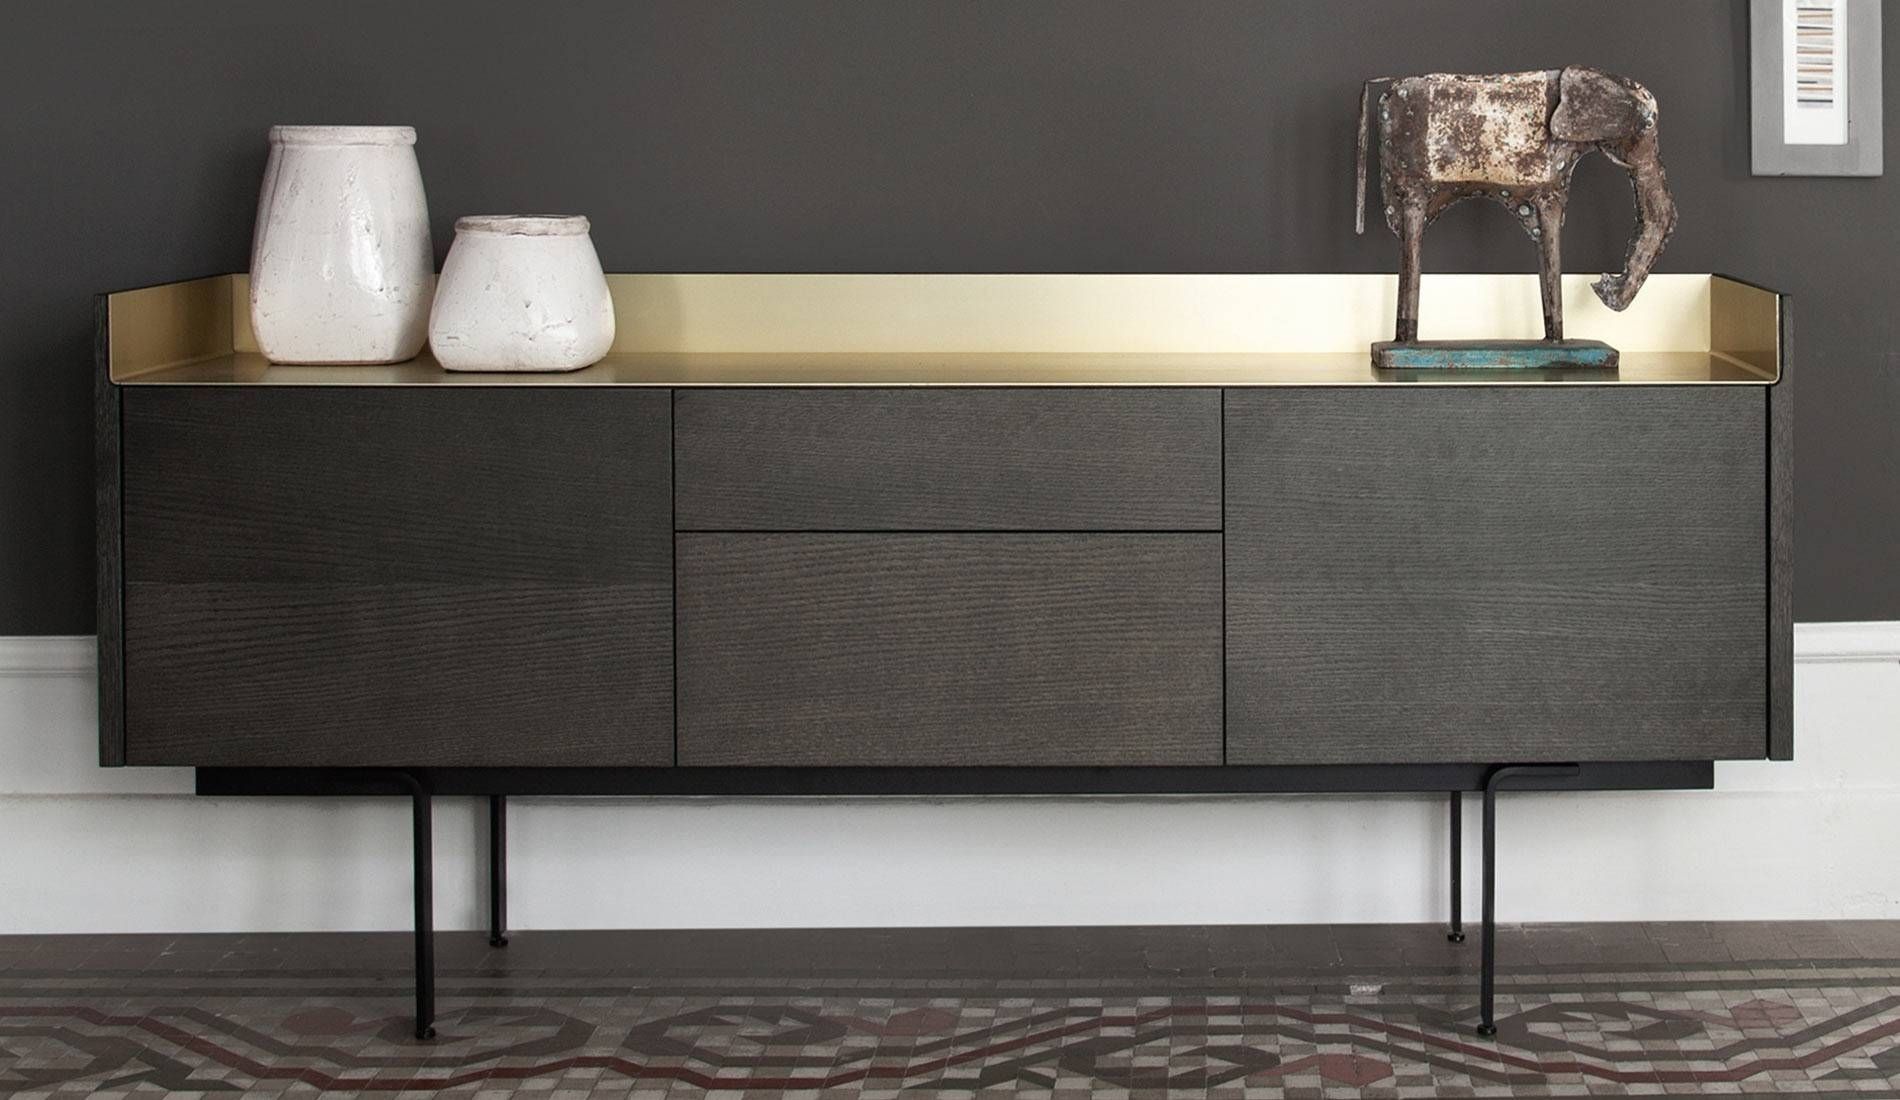 Punt Stockholm 3b Sideboard | Dopo Domani Within Current Stockholm Sideboards (View 5 of 15)